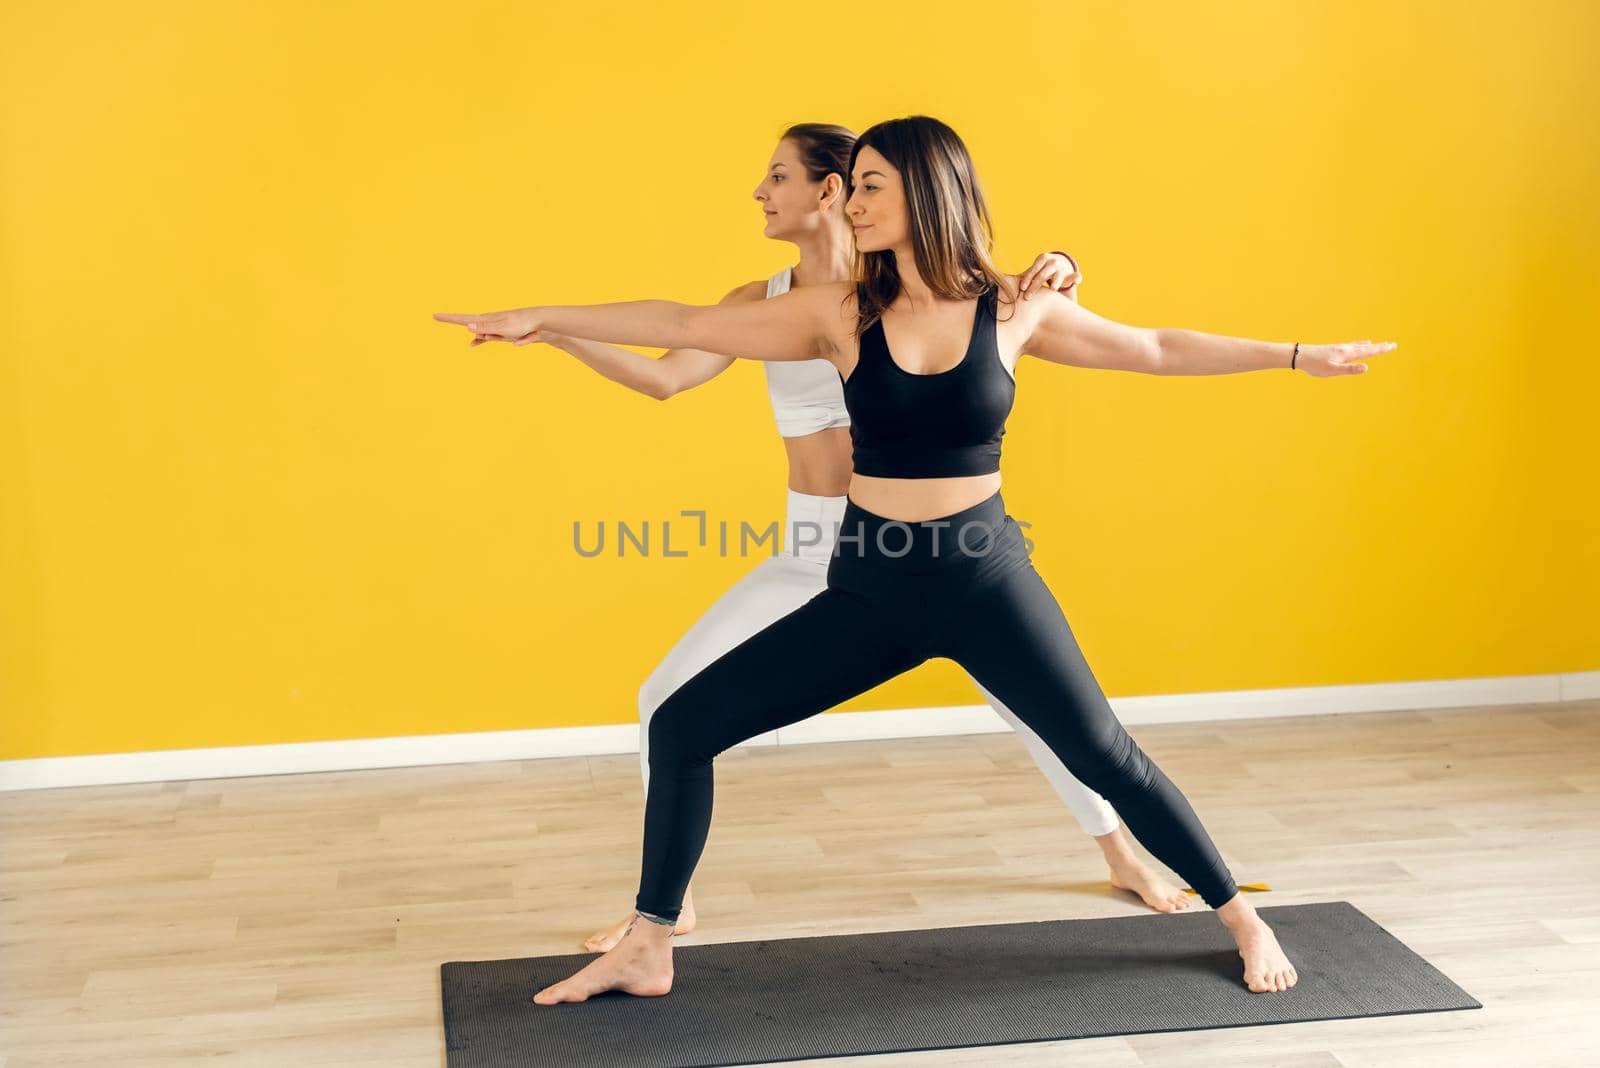 Fitness woman training with her personal trainer at gym. Young couple doing stretching exercises, Virabhadrasana, pose Warrior, copy space.